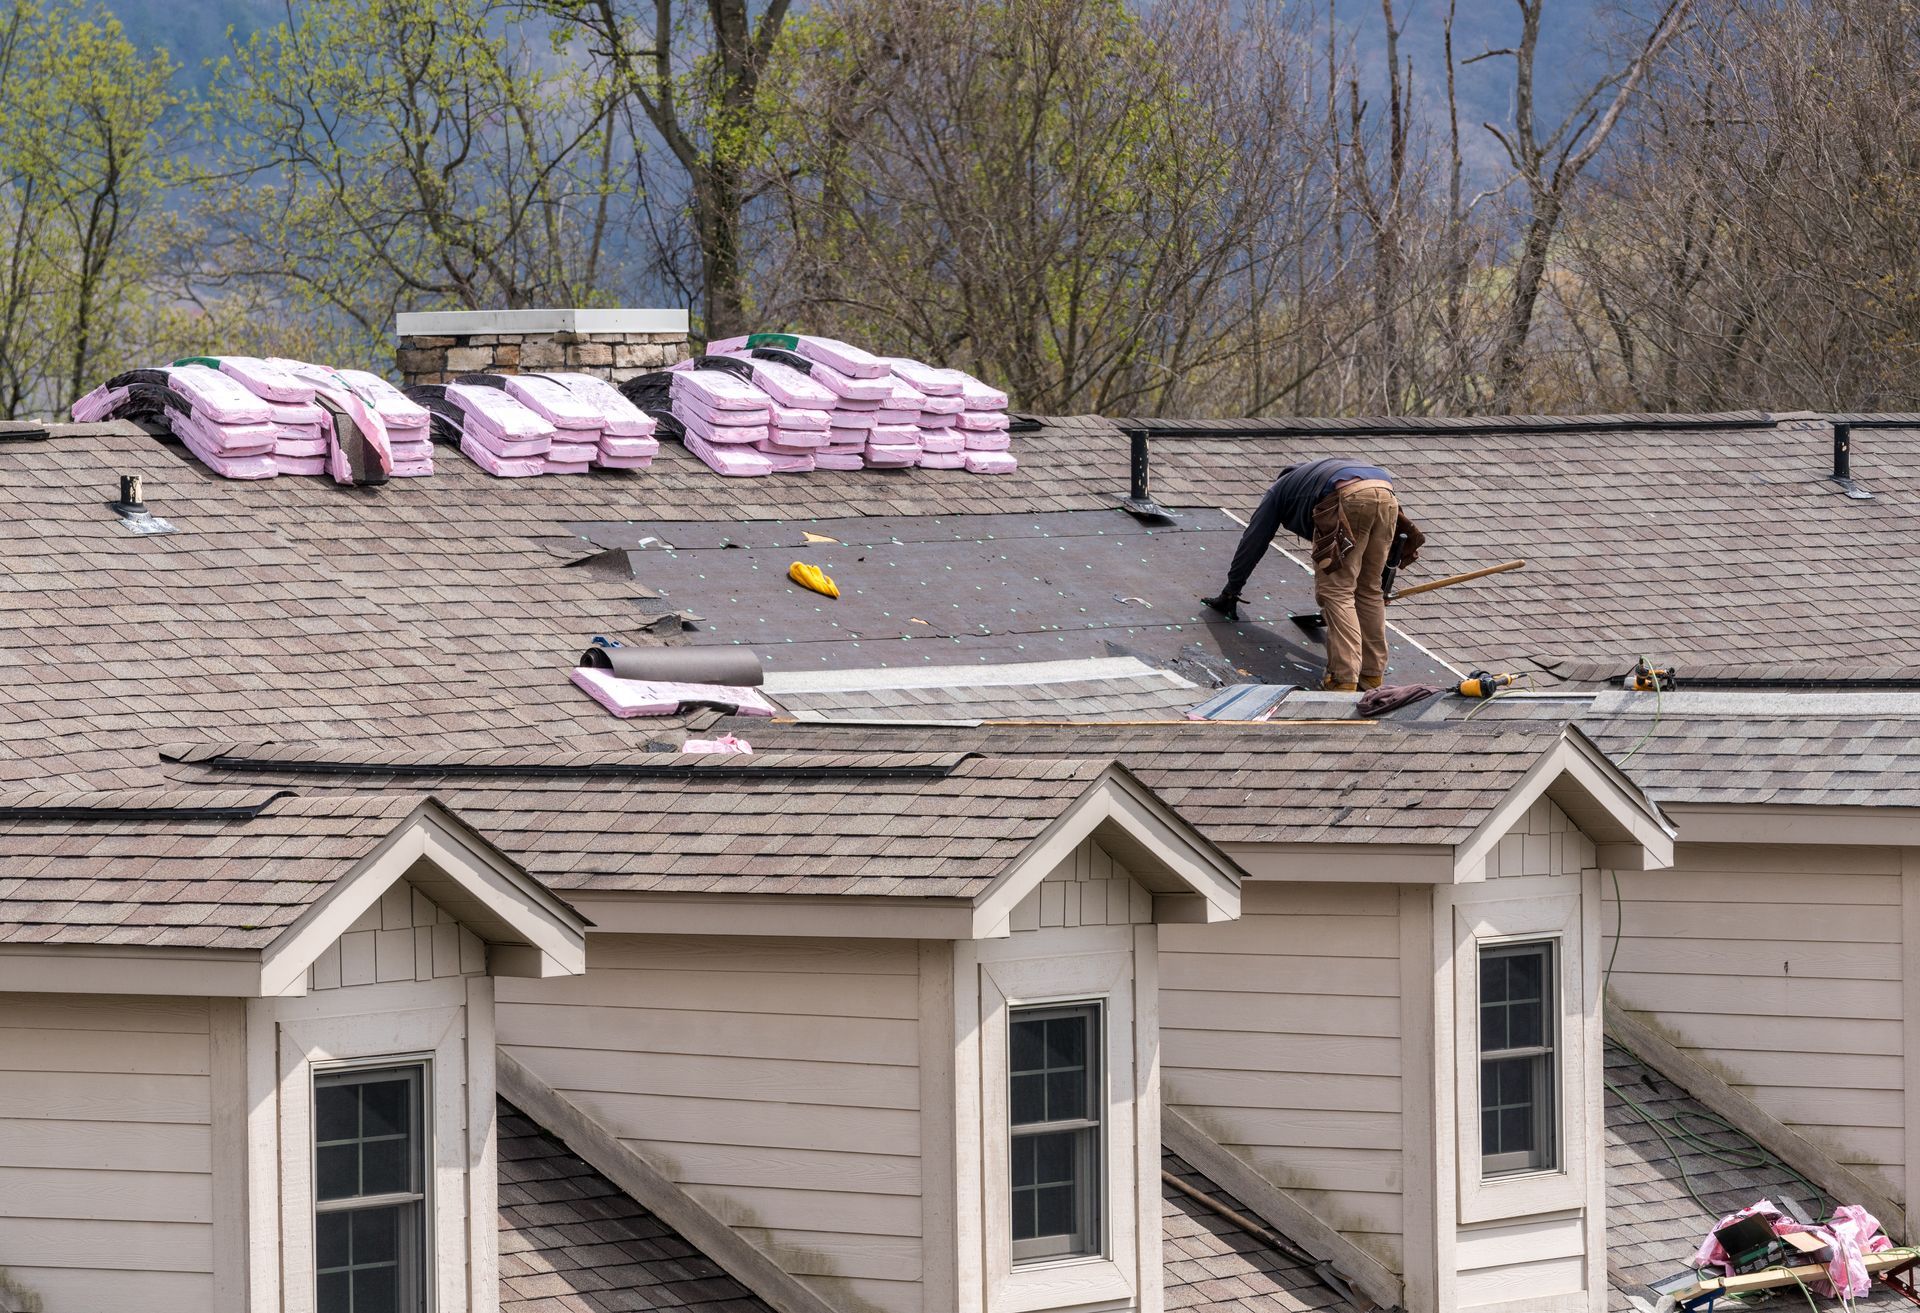 Key Factors to Consider When Choosing a Roofing Contractor